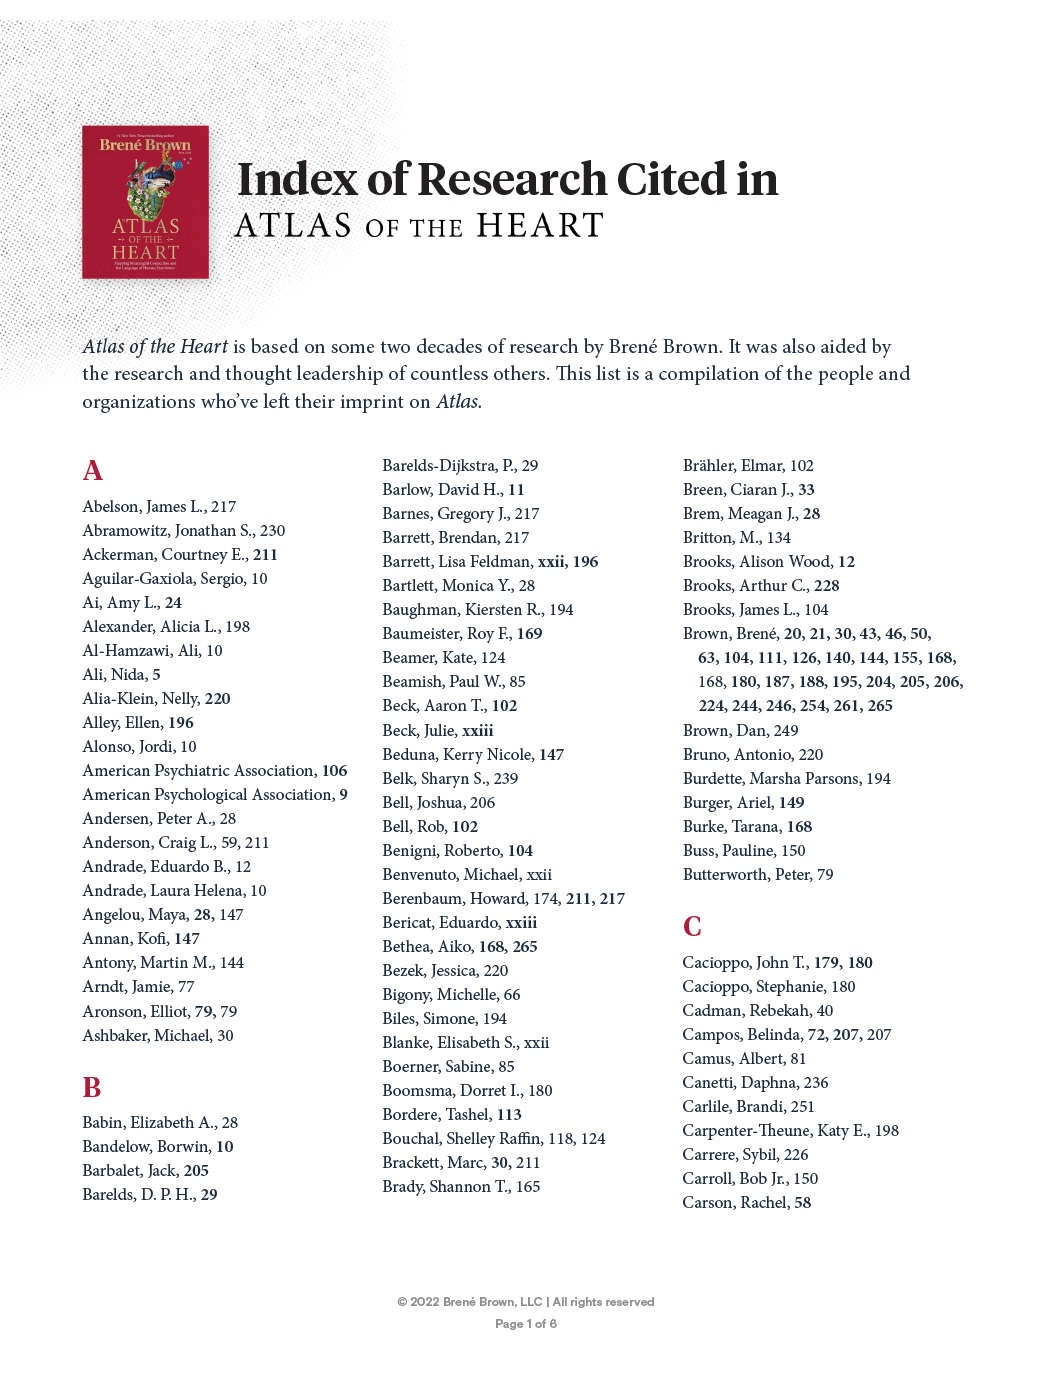 Atlas of the Heart Index of Research Cited